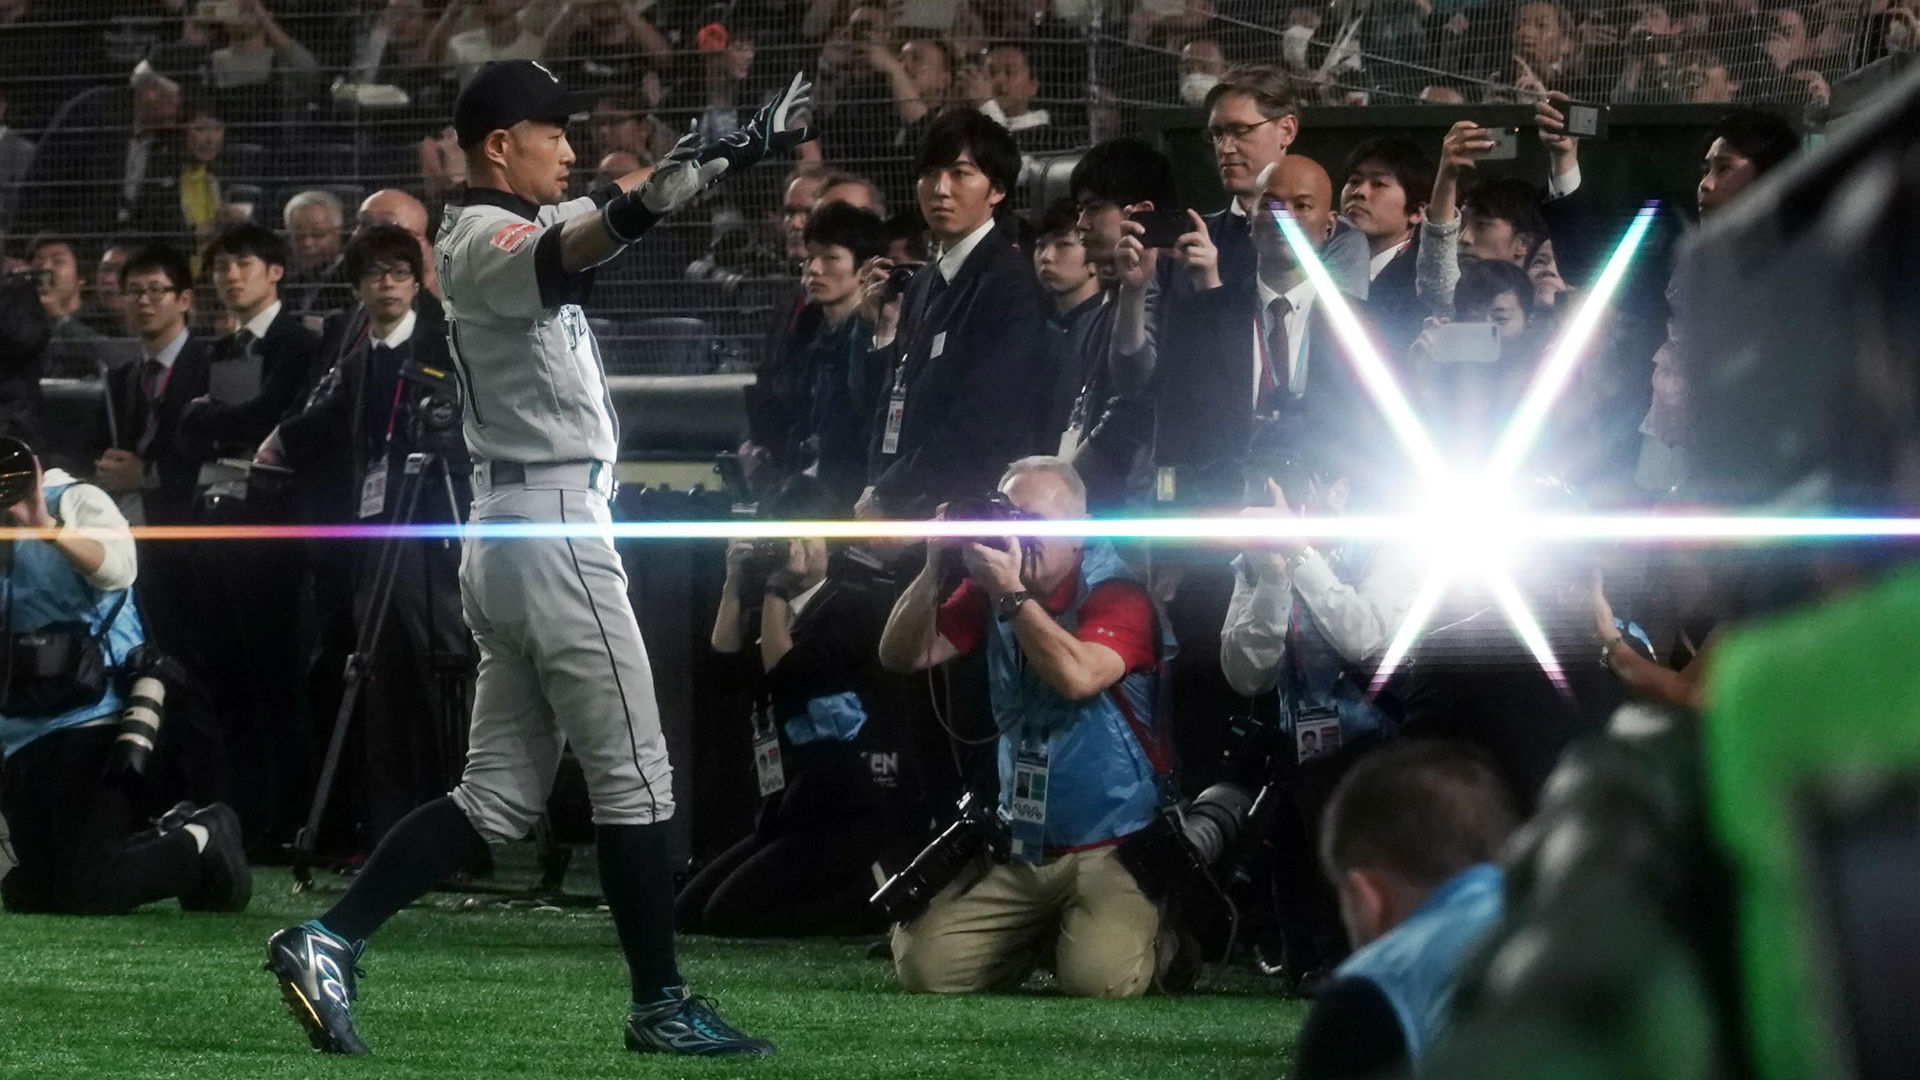 Prior to Thursday’s game, Ichiro had 3,089 hits in MLB (23rd all-time) and 1,278 in Japan.